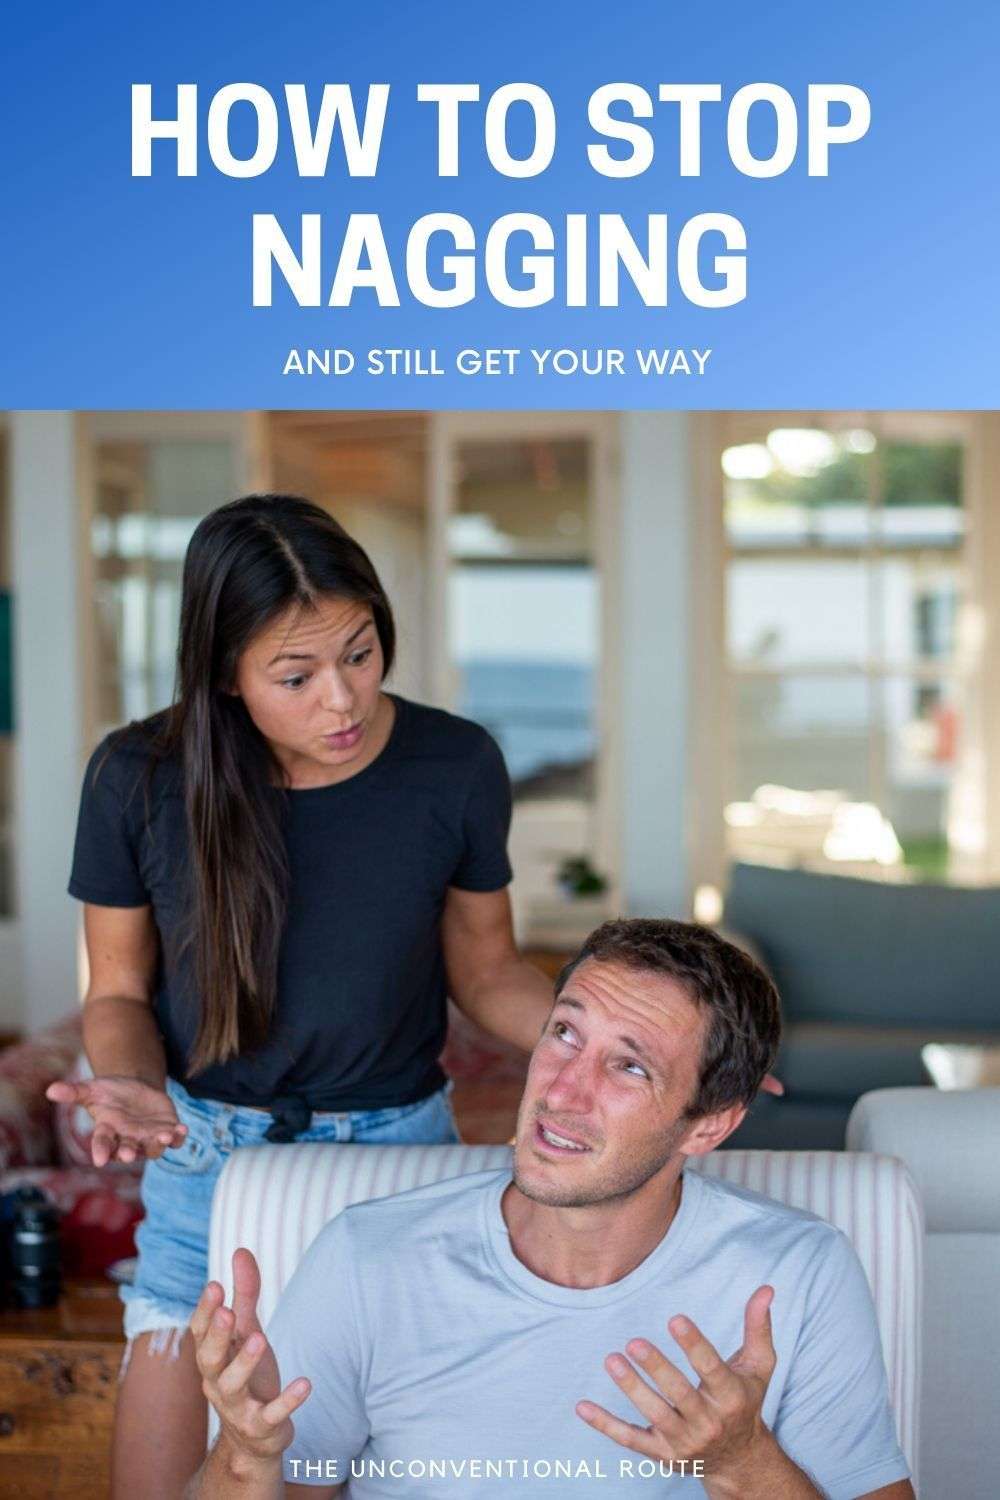 How to Stop Nagging (But Still Get Your Way) with W.A.R.T ...